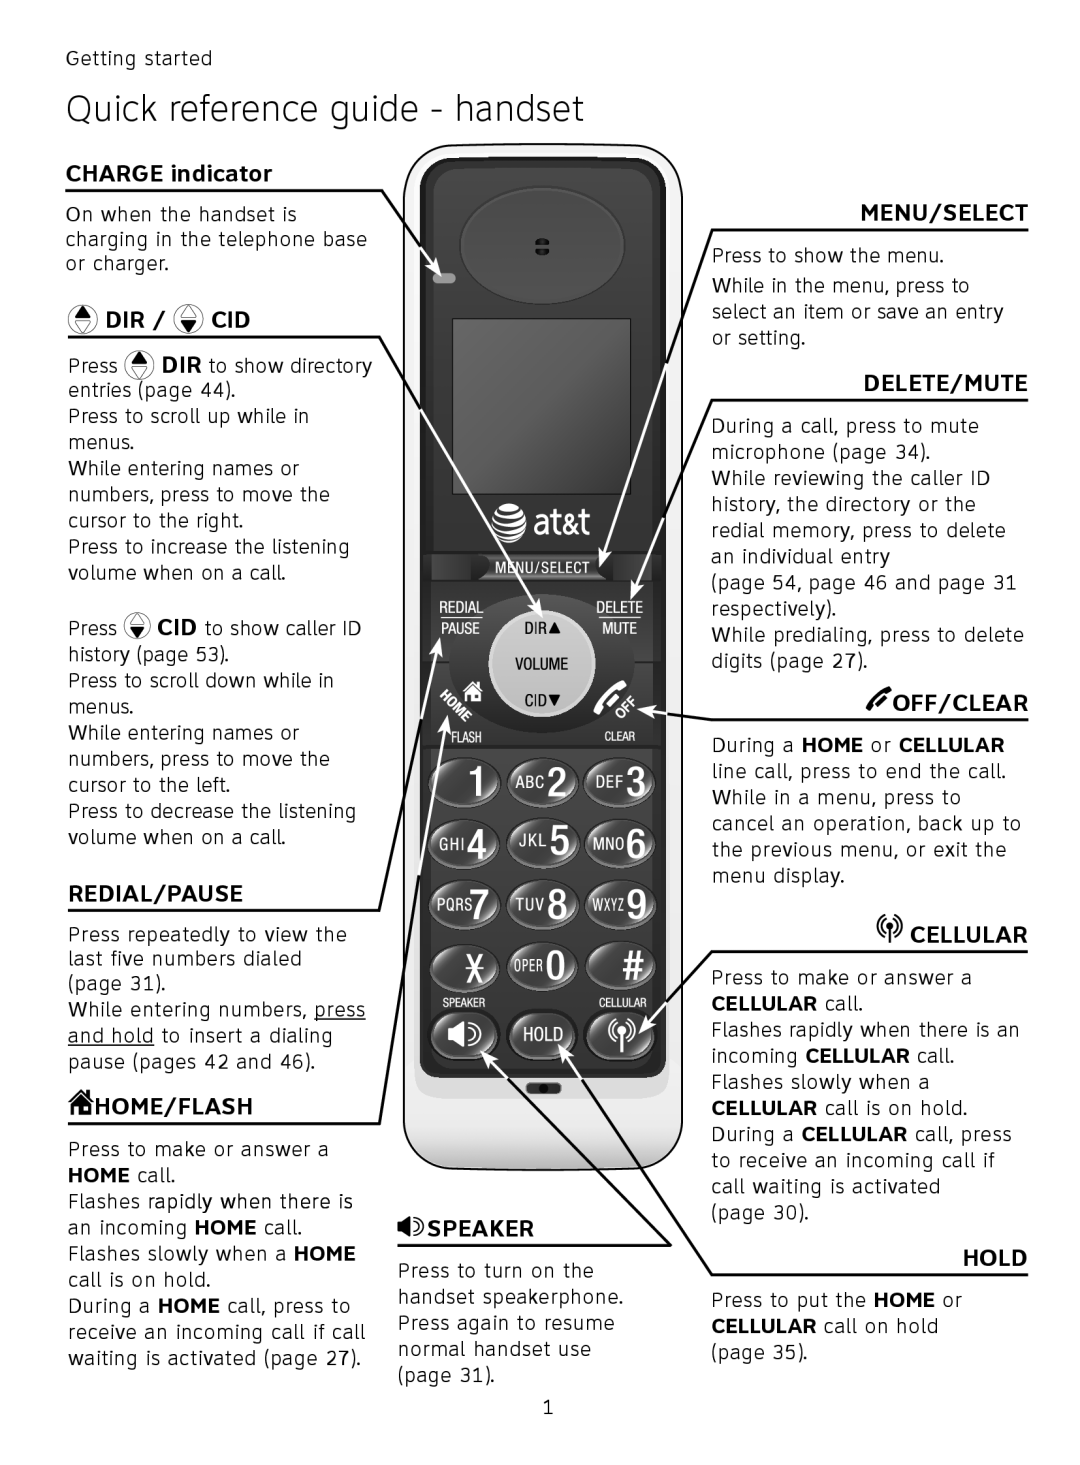 AT&T TL91178 Quick reference guide - handset, CHARGE indicator, Dir / Cid, Redial/Pause, Home/Flash, Speaker, Menu/Select 